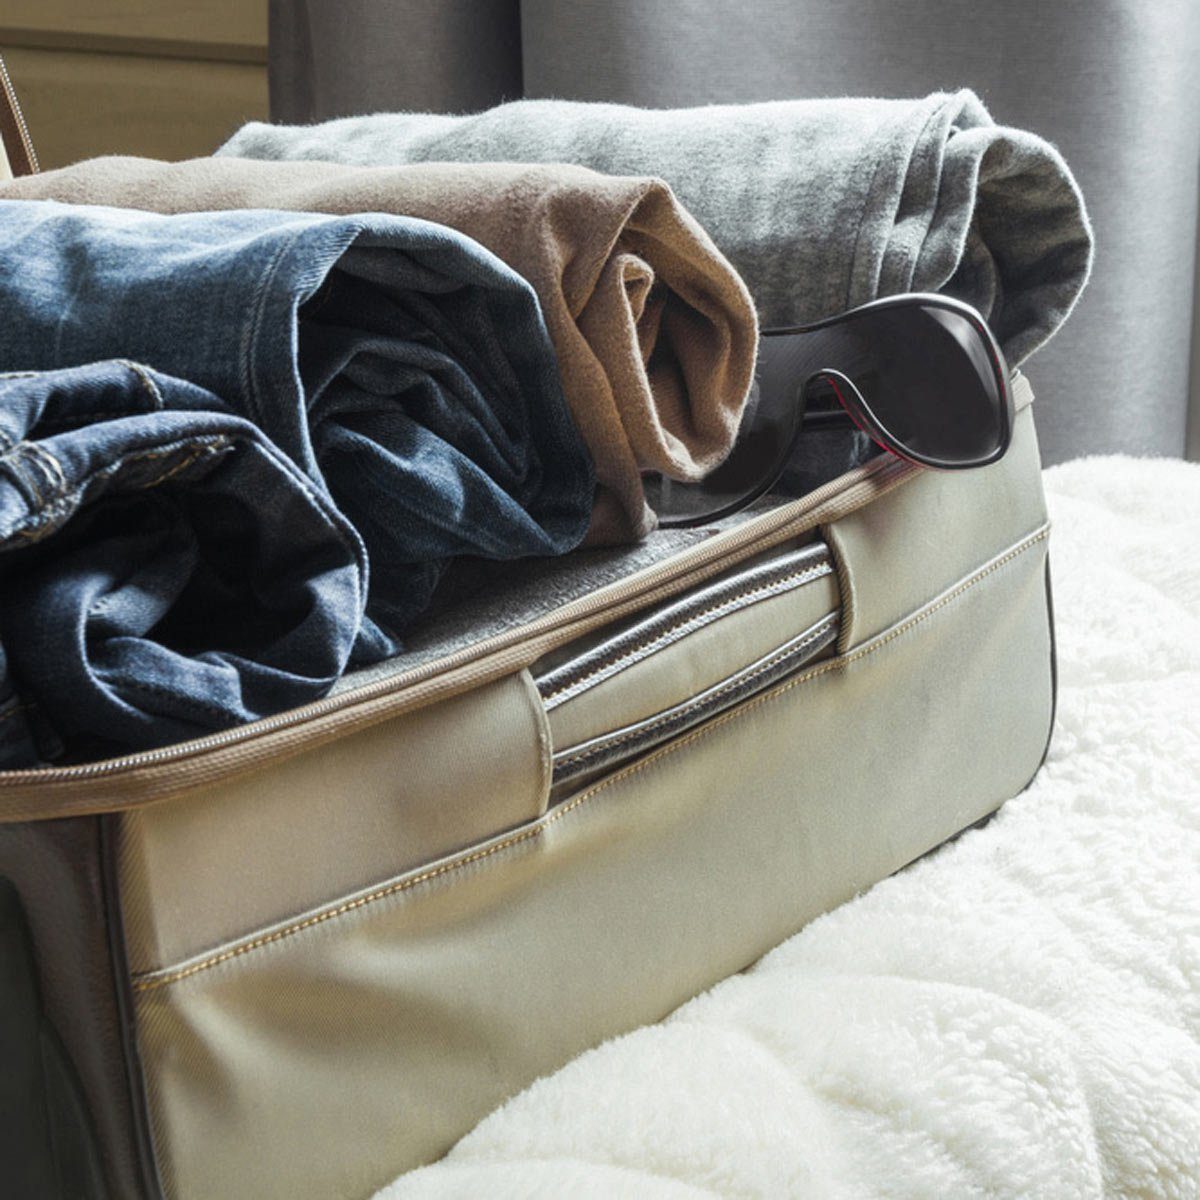 Storing in Suitcases? Roll Away